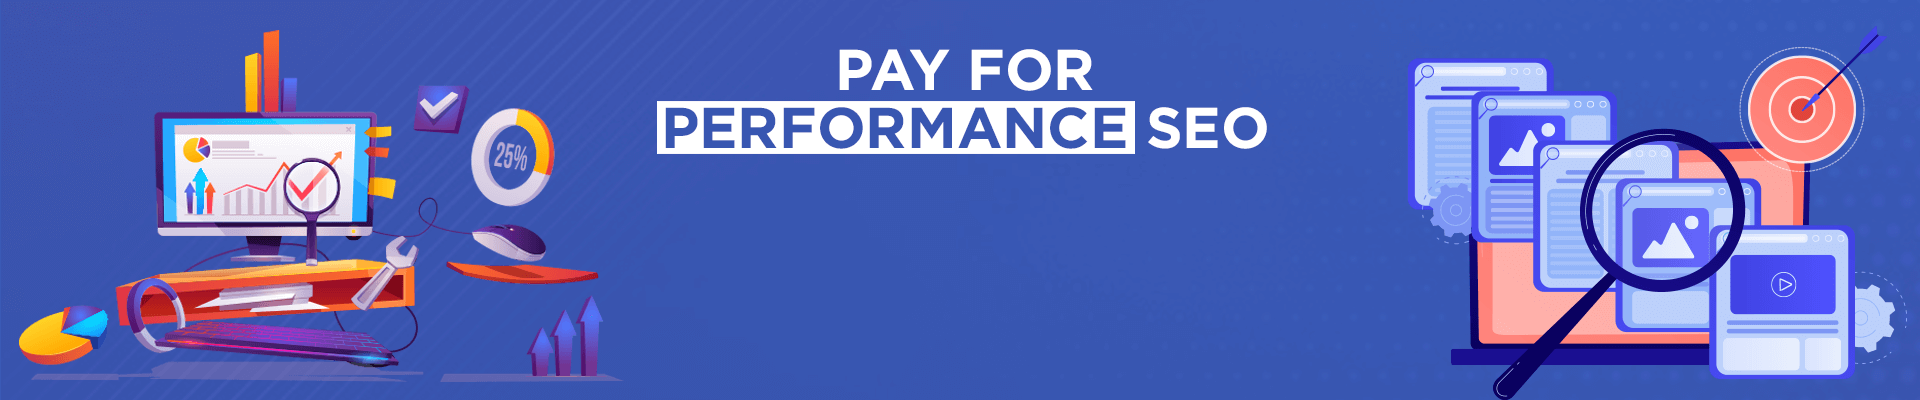 Banner for Pay for Performance SEO